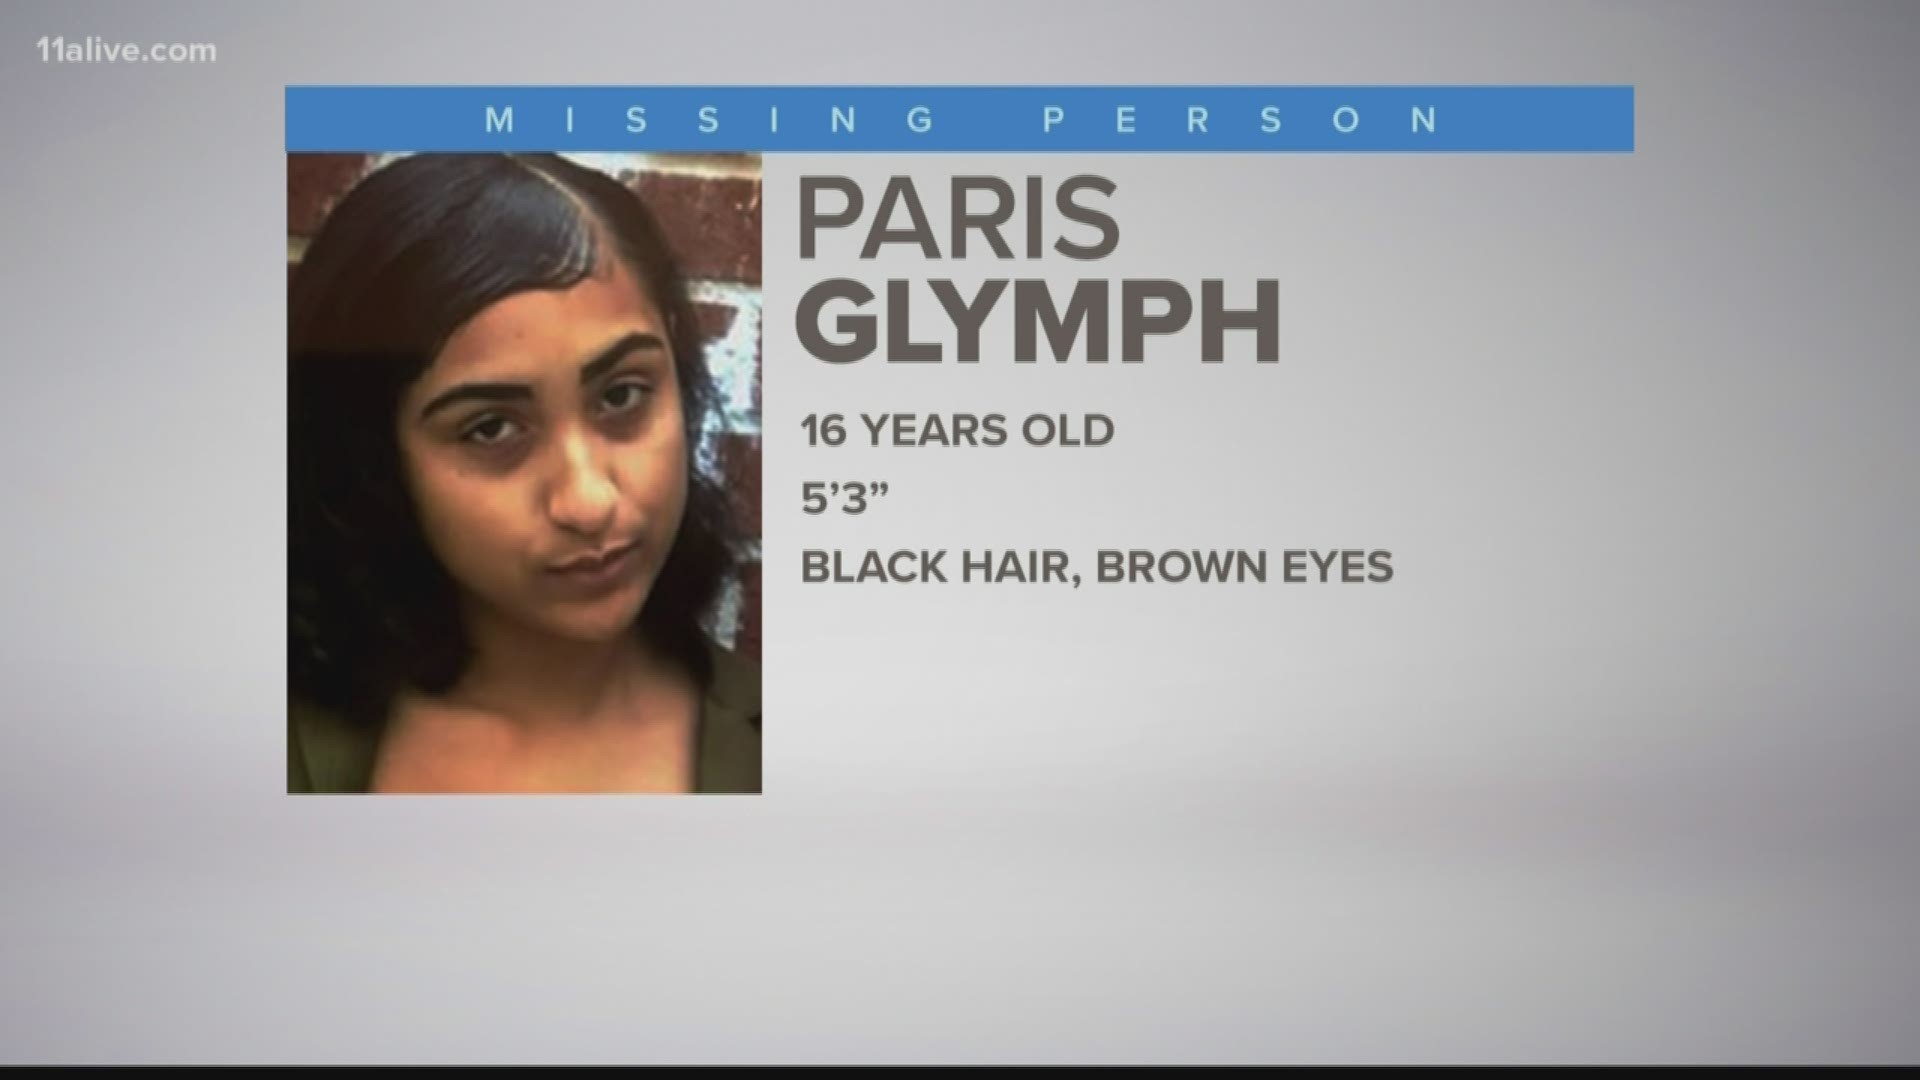 The Douglas County Sheriff's Office is looking for Paris Glymph.